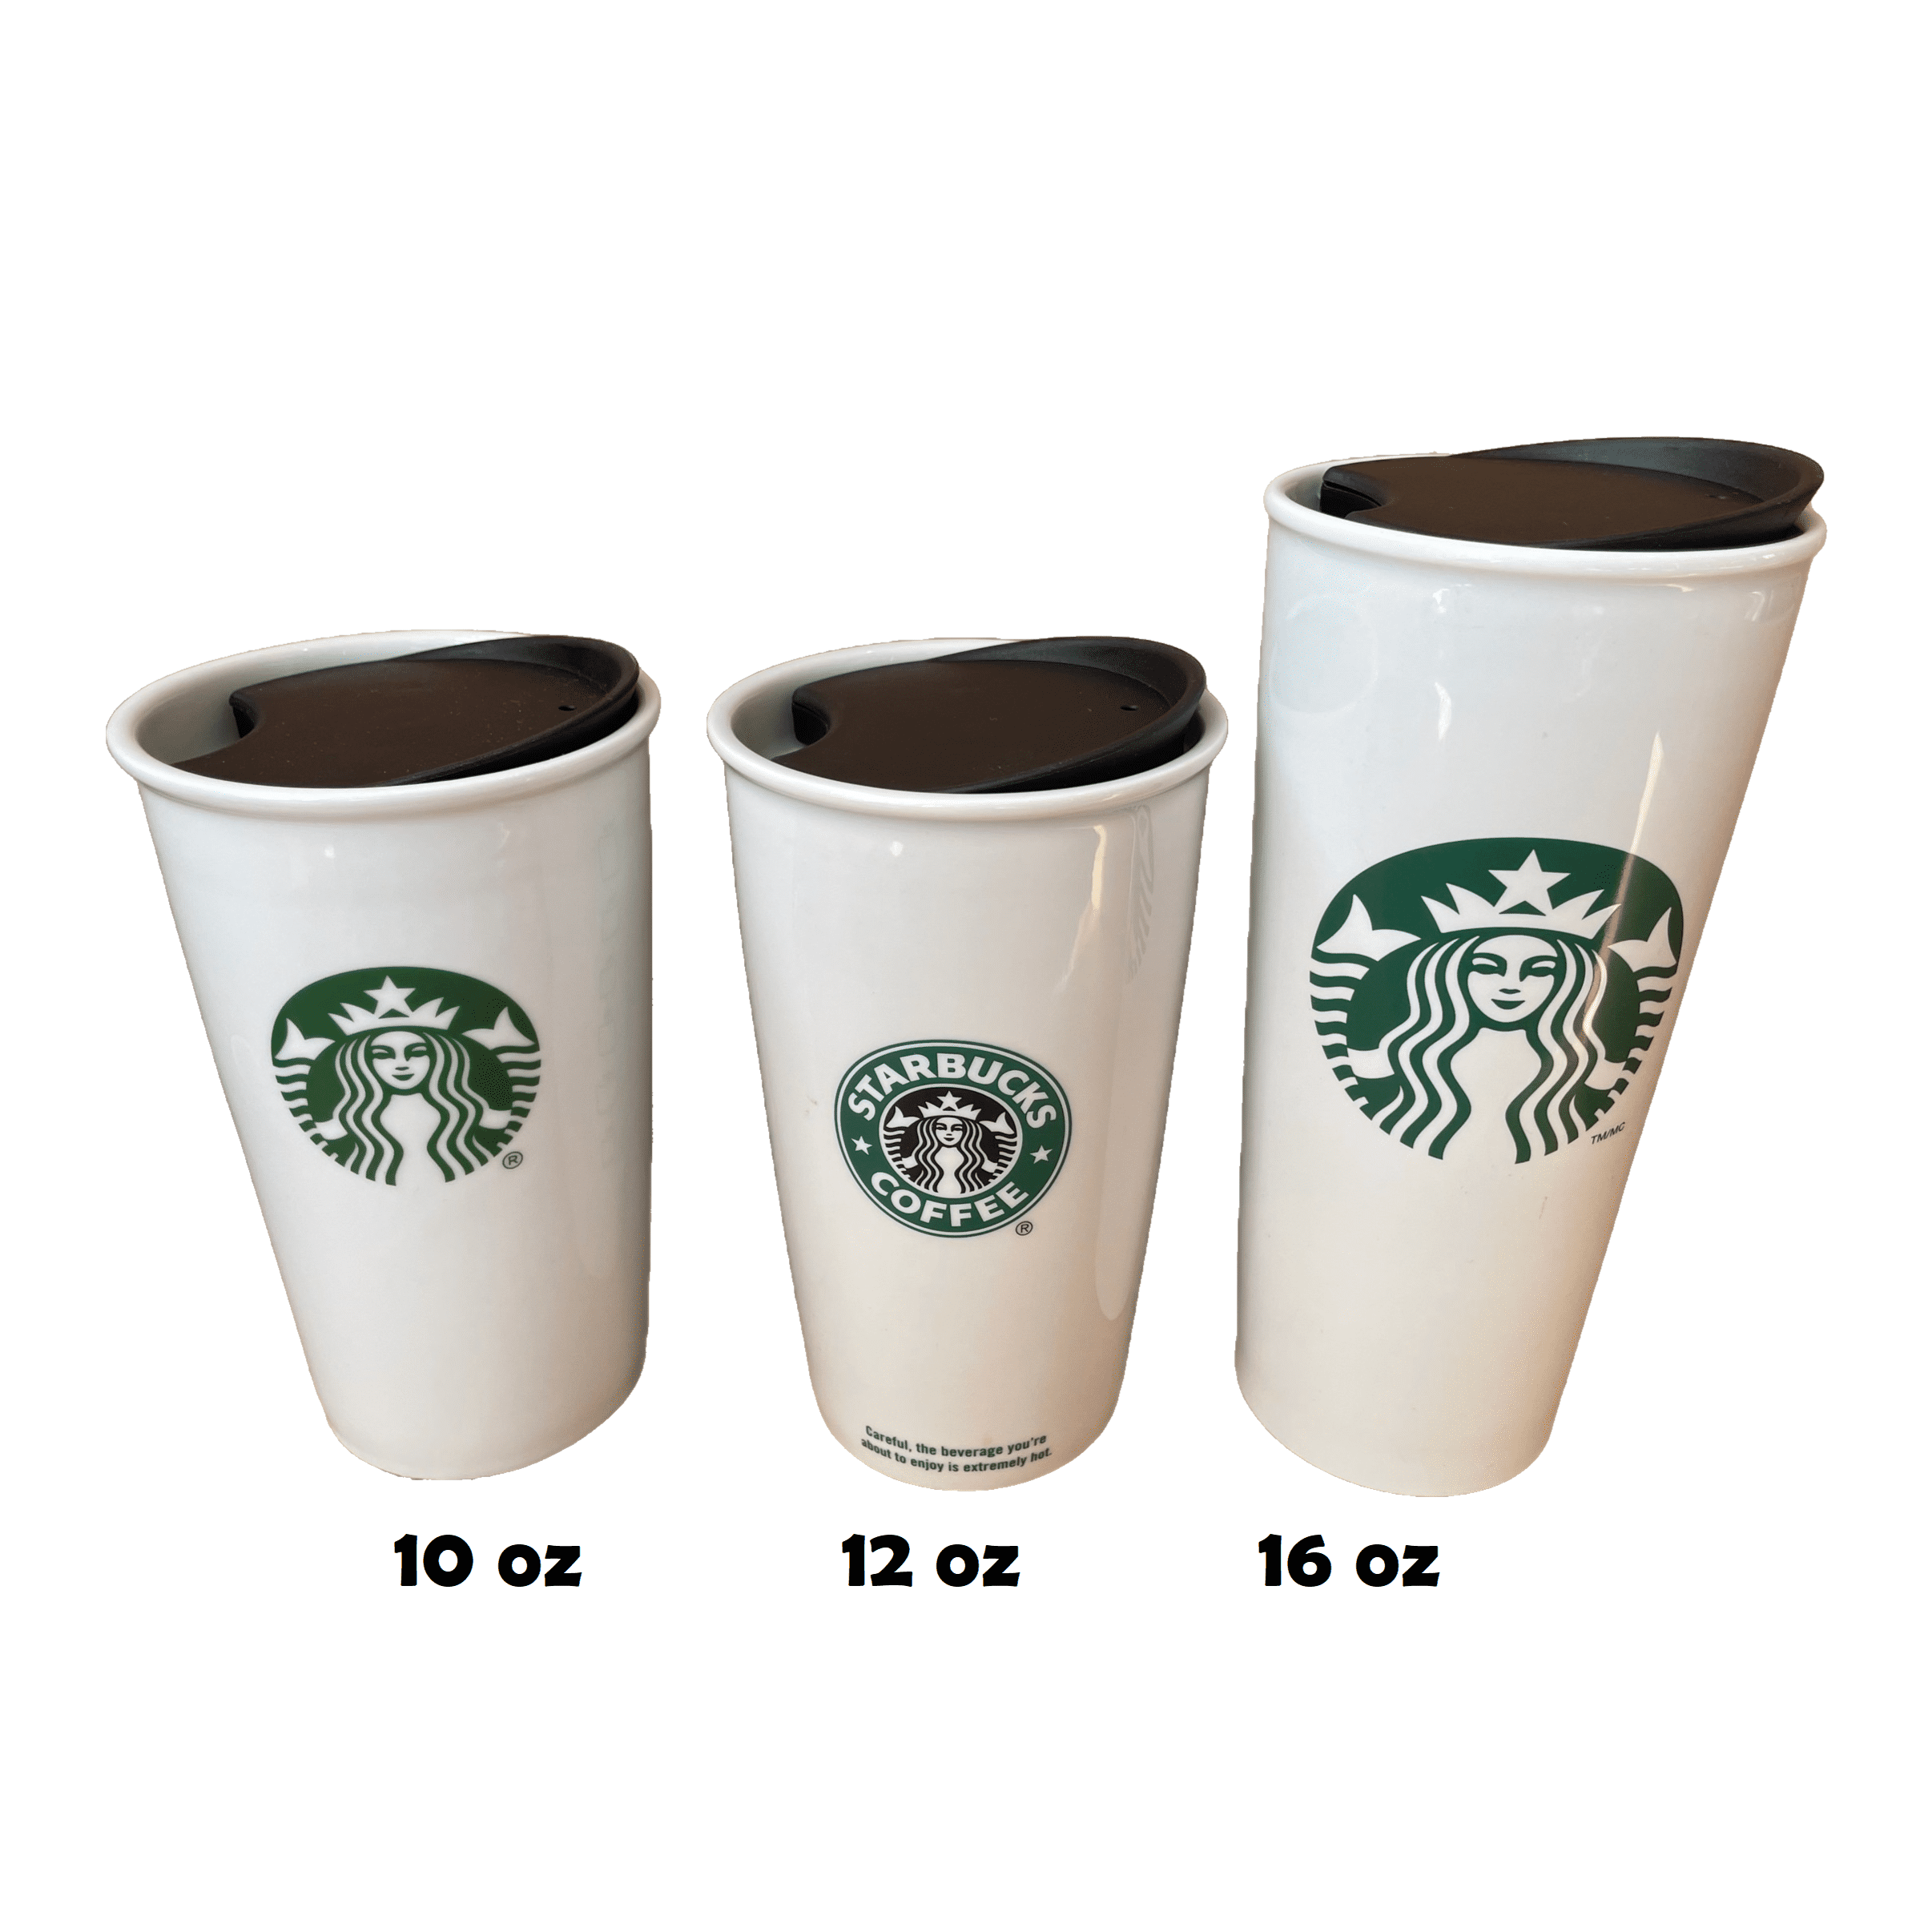 WHERE/HOW CAN I GET A REPLACEMENT LID FOR MY FAVORITE CUP!? 😭😭😭 : r/ starbucks